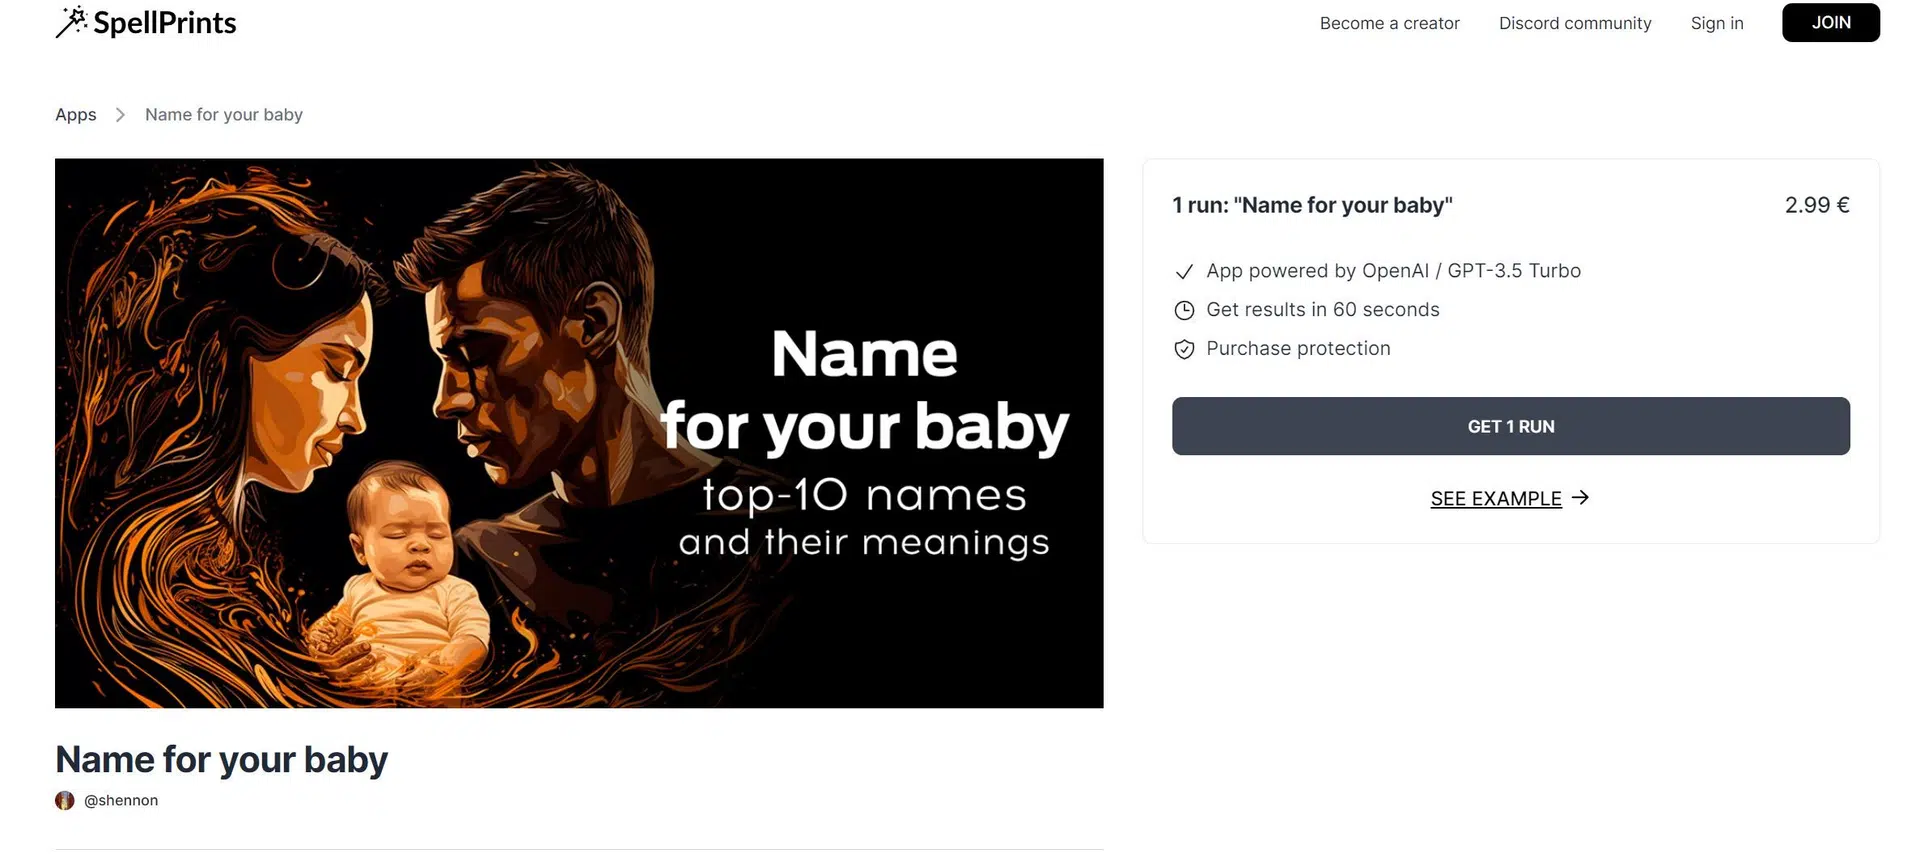 Name for your babywebsite picture